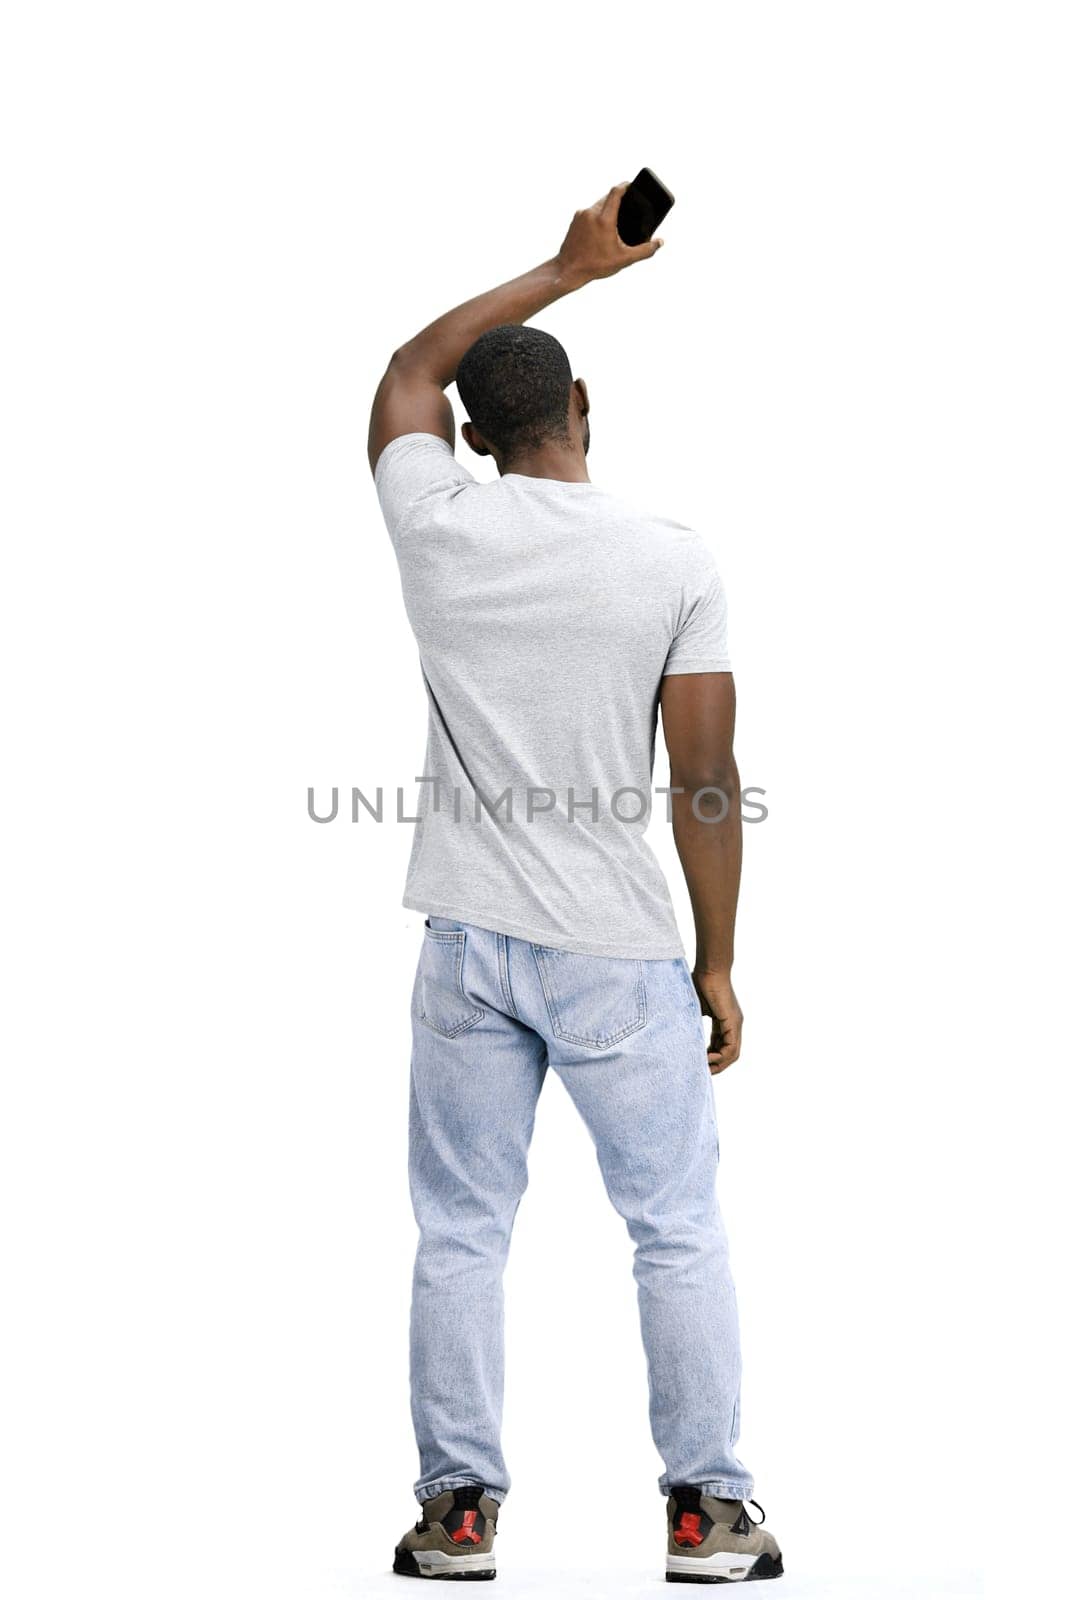 A man, full-length, on a white background, waving his phone by Prosto